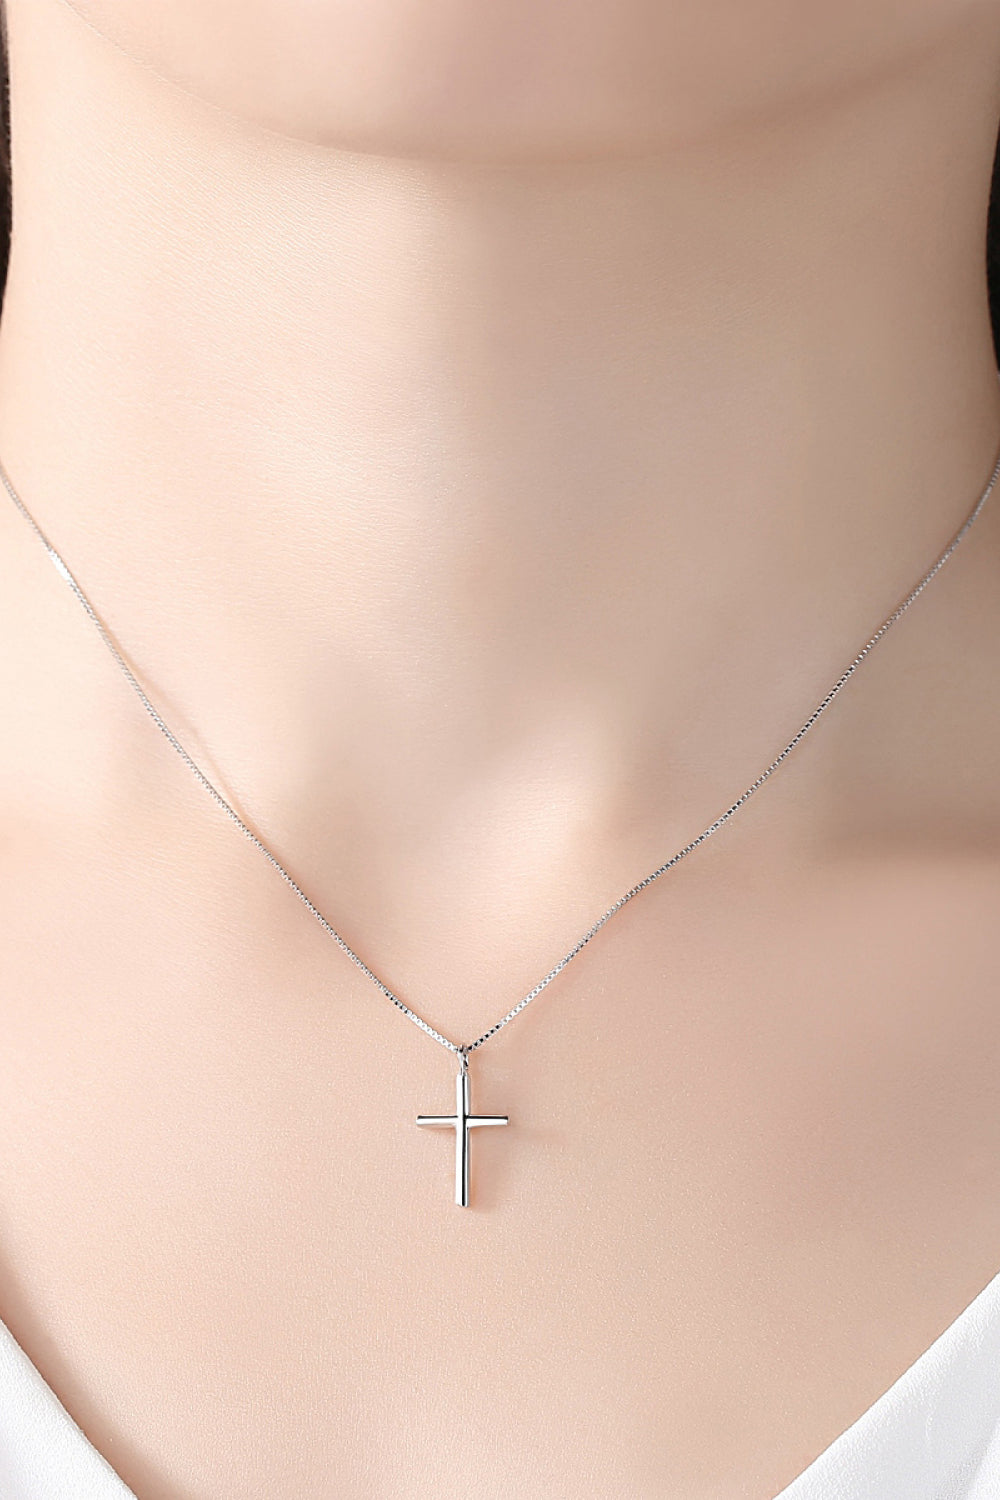 Trendsi Cupid Beauty Supplies Silver / One Size Women Necklace Cross Pendant 925 Sterling Silver Necklace